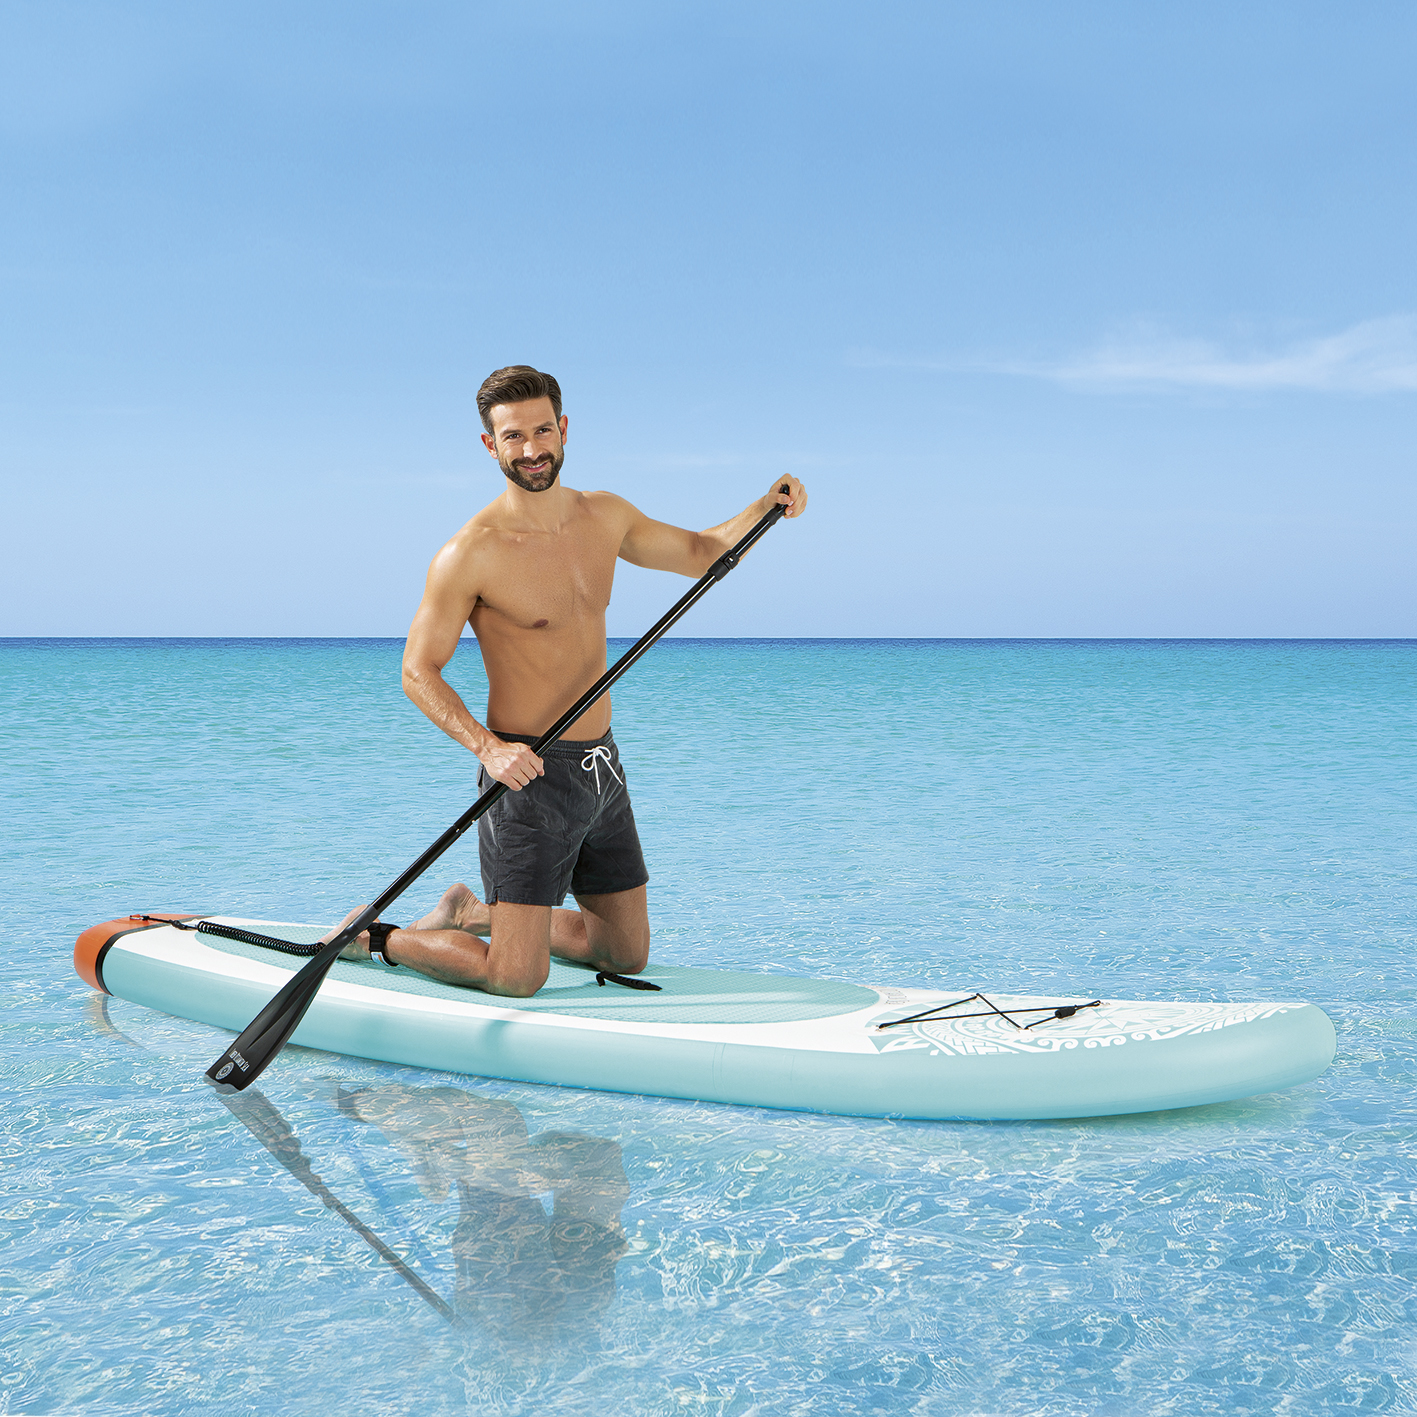 06918 mehrfarbig Stand-Up Paddle-Board, EASYMAXX